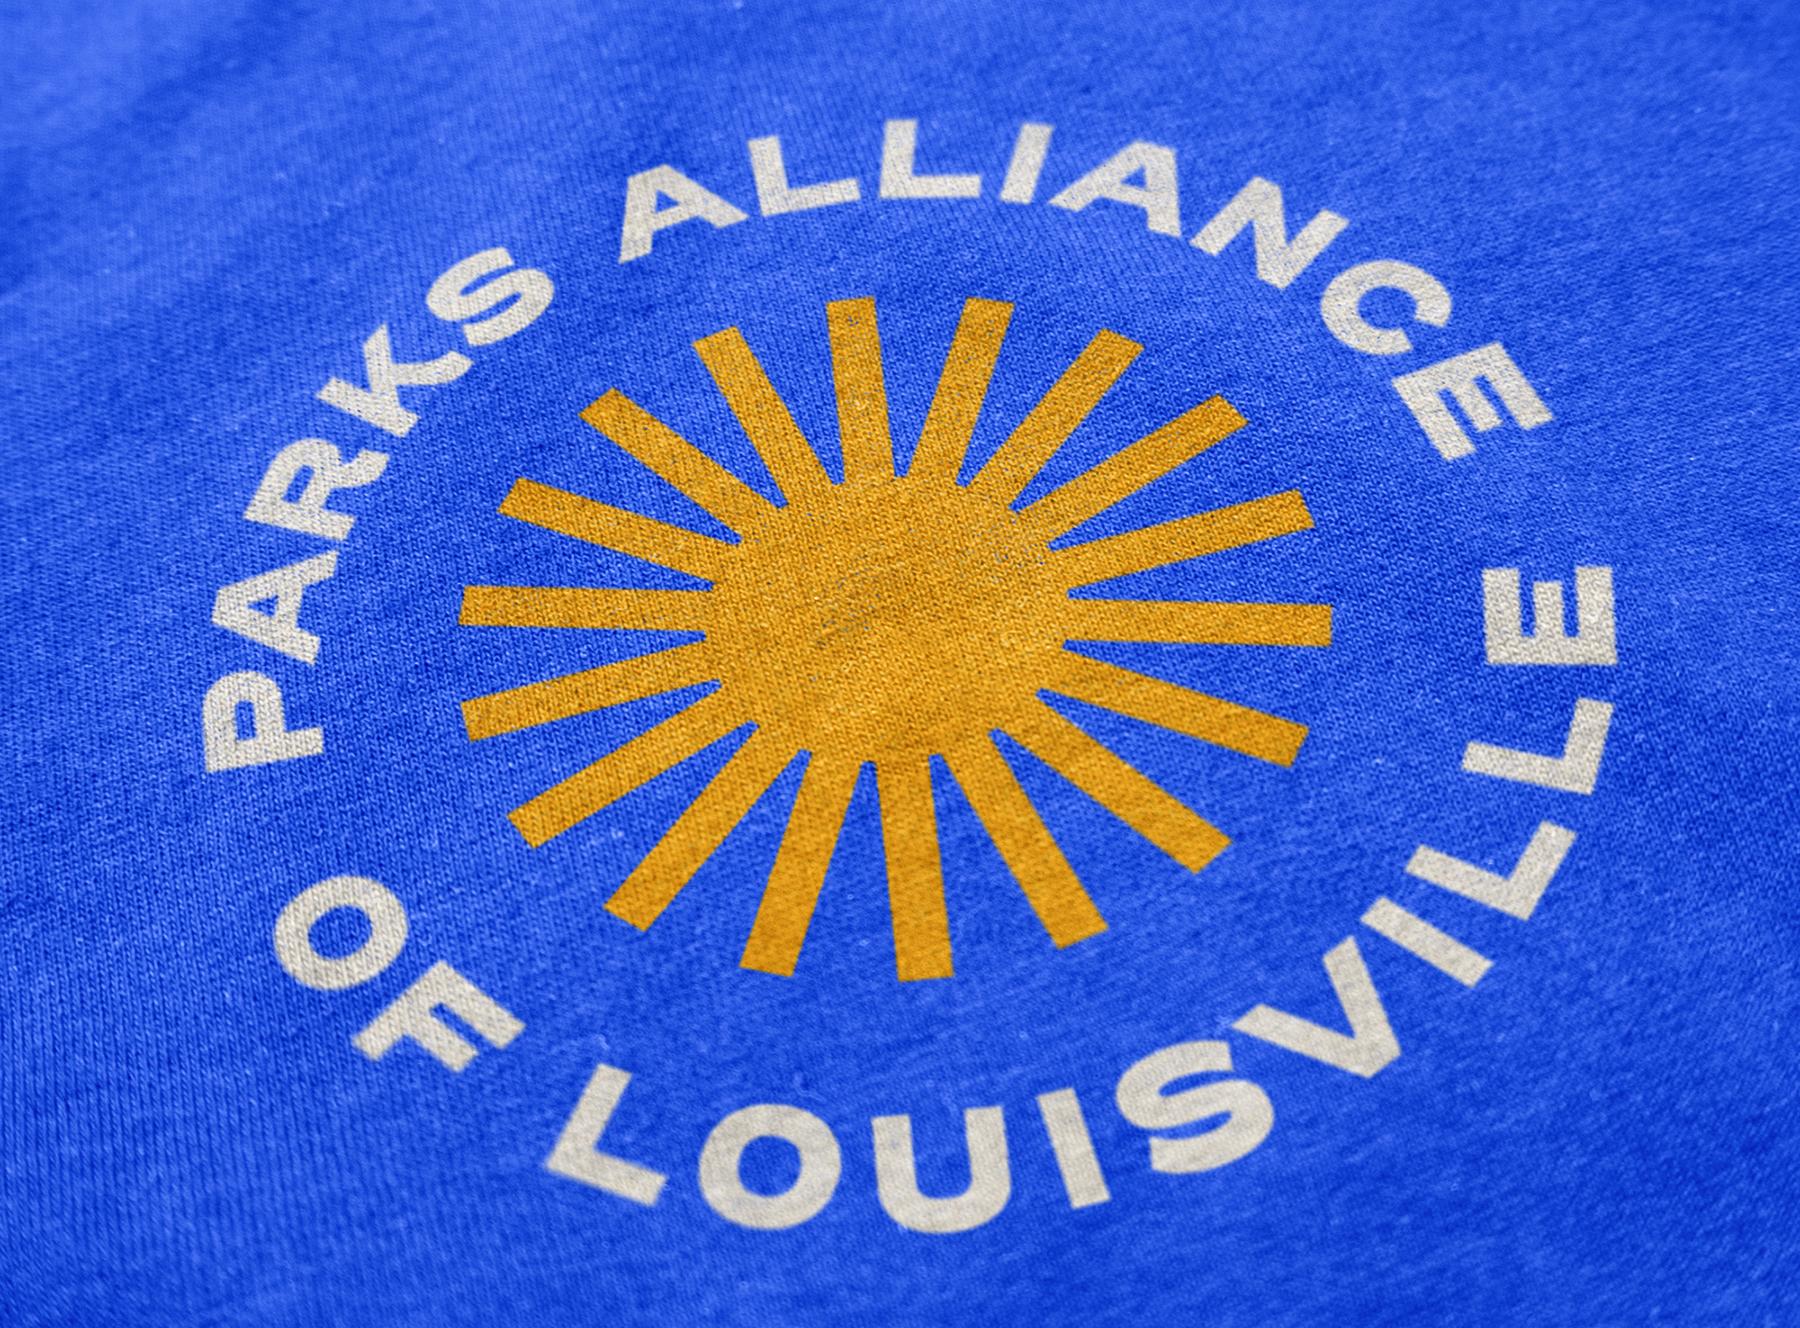 Parks Alliance of Louisville logo printed on a blue shirt.